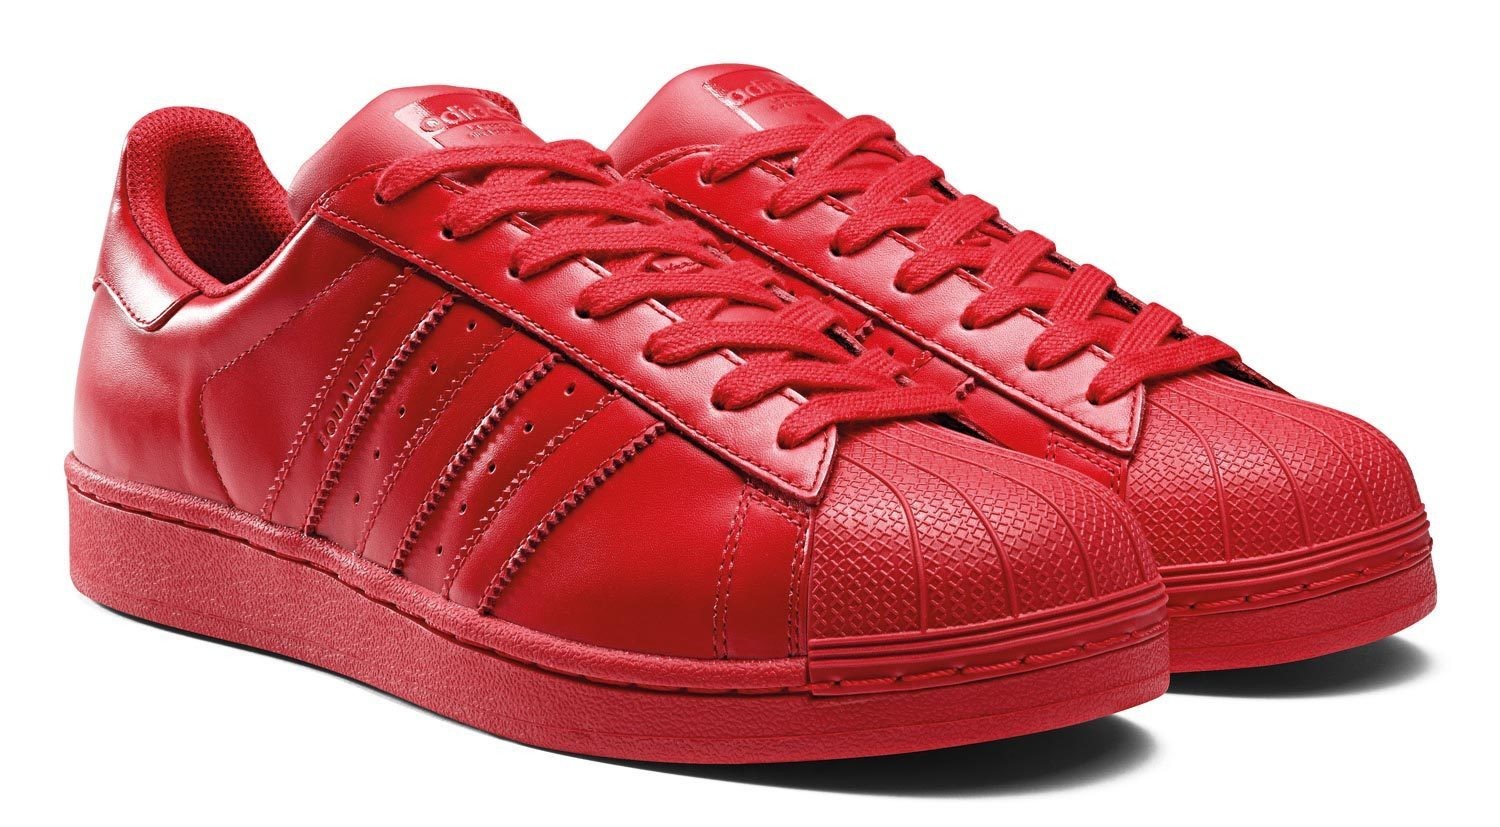 Adidas Superstar Supercolor Red